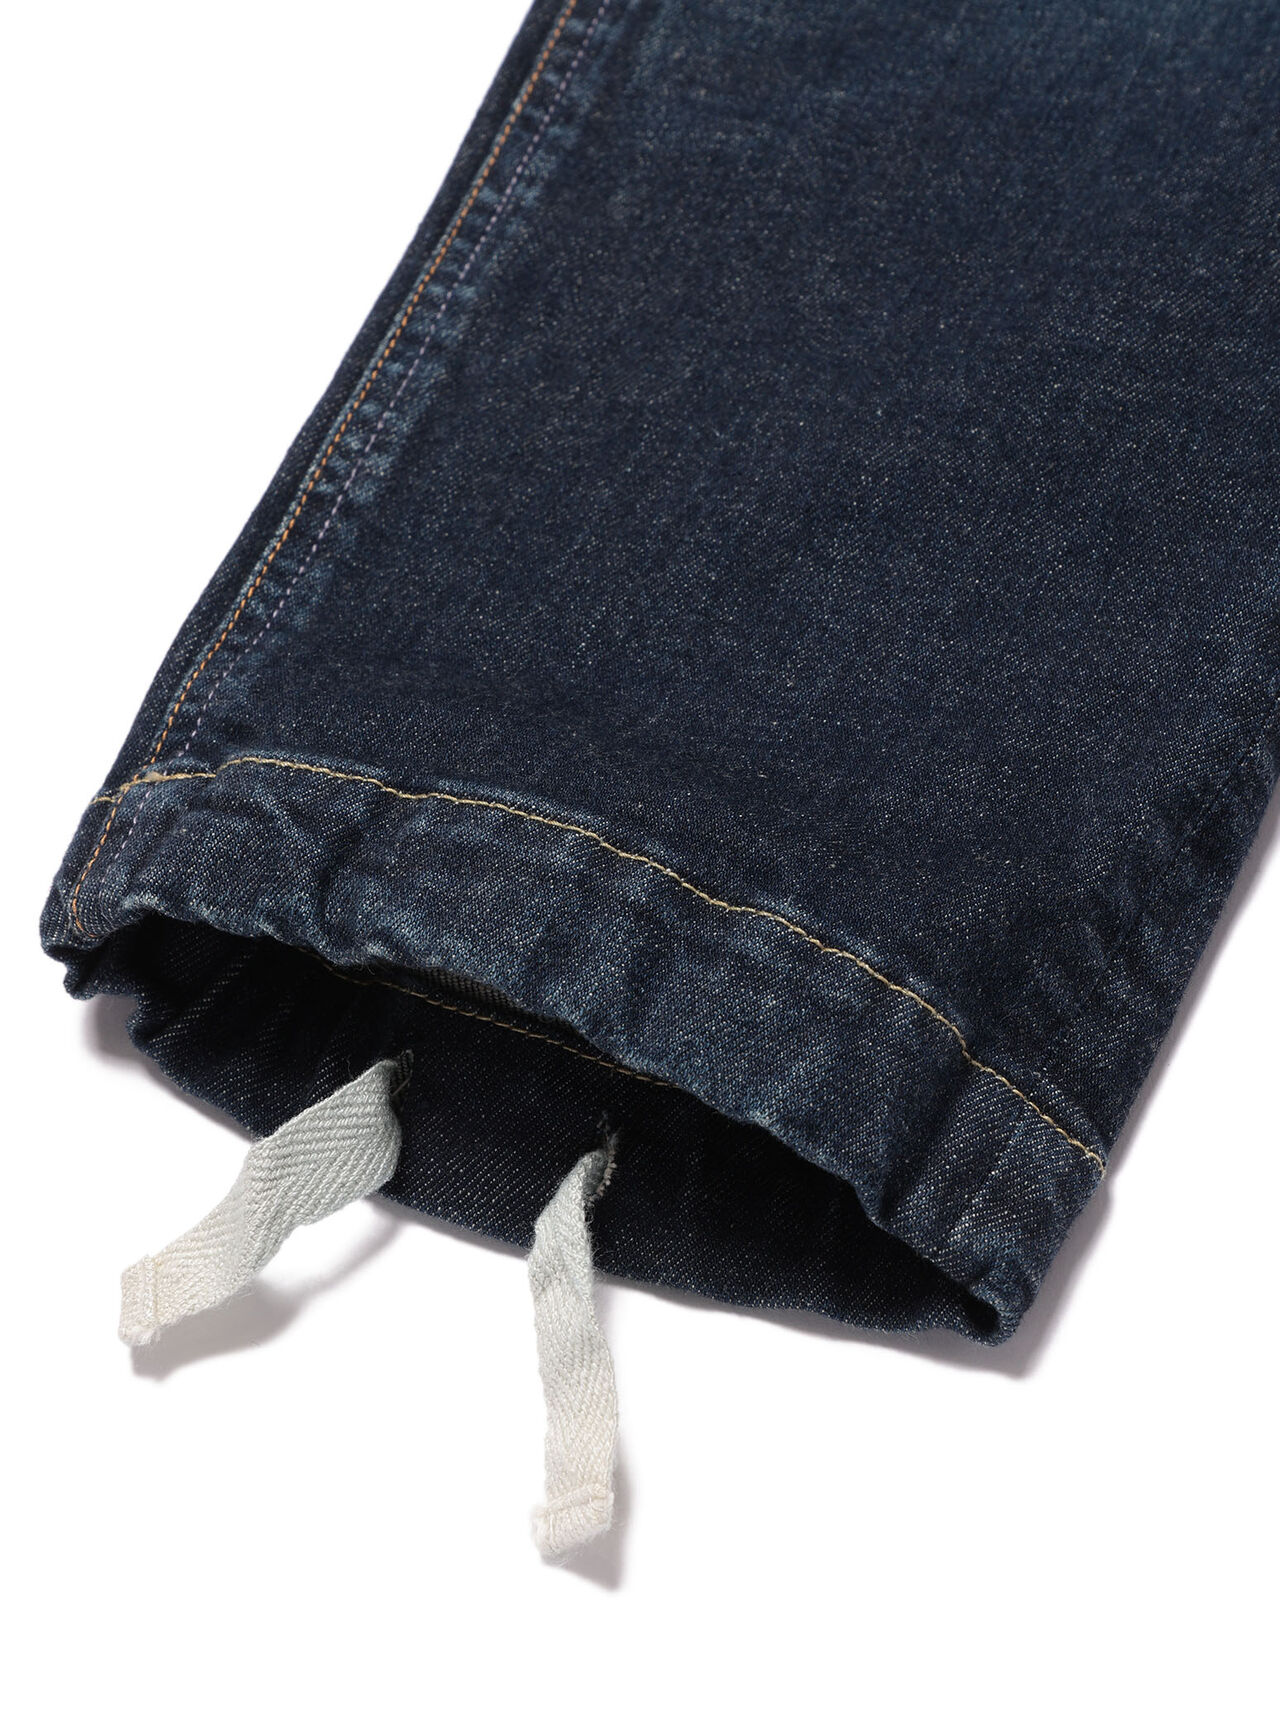 Jeans - Crotch 22-U2 3 years,M, large image number 5